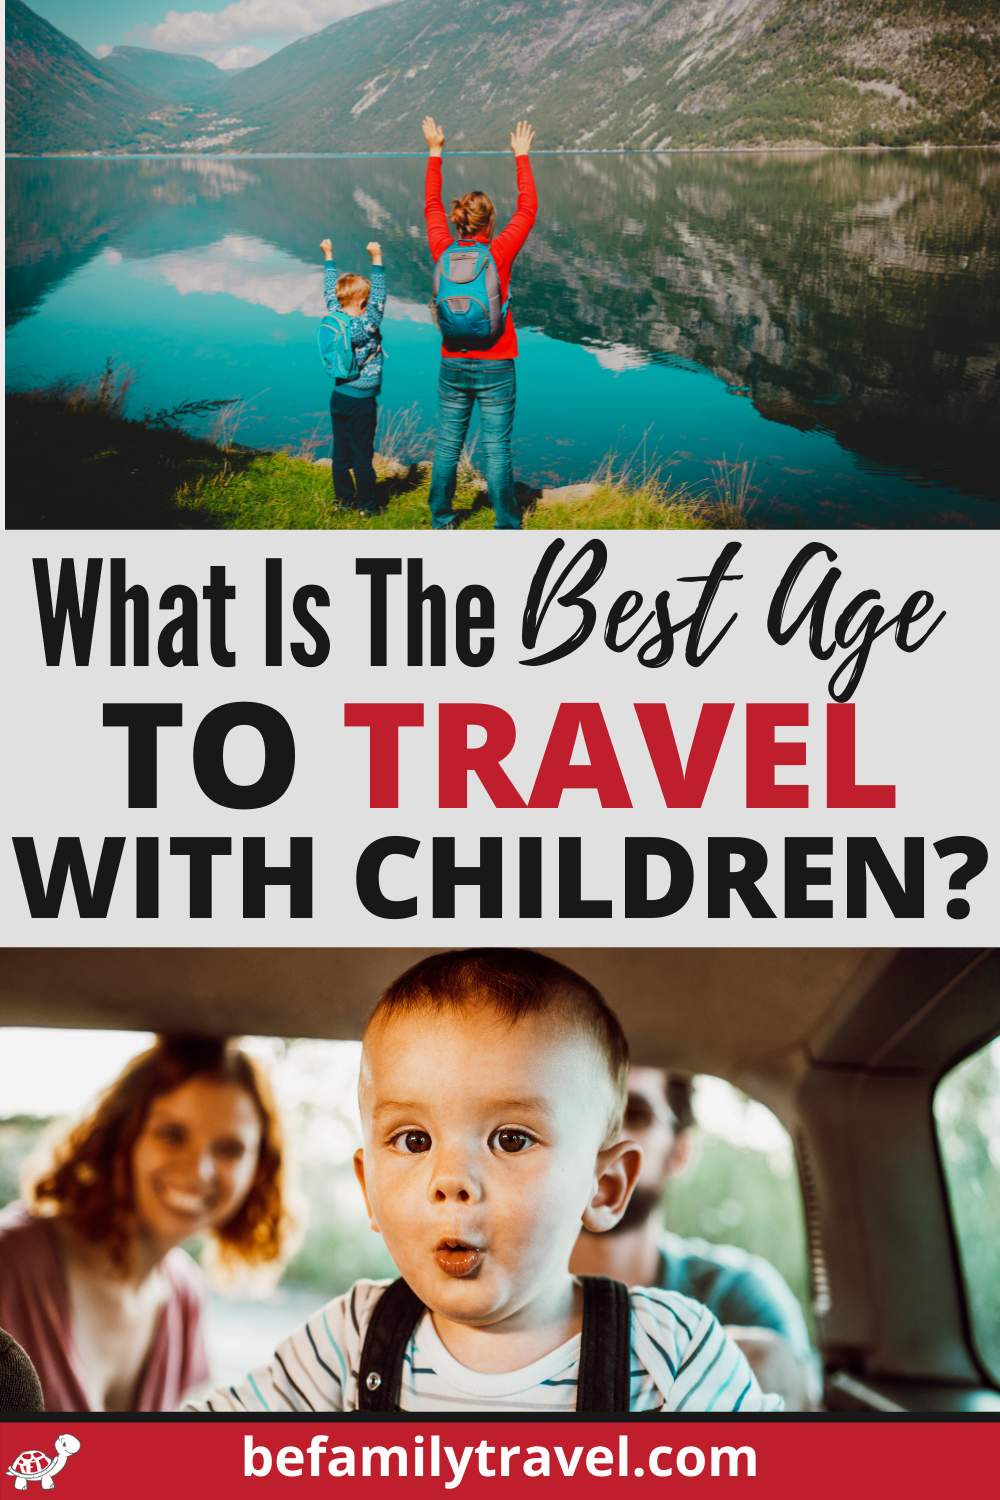 age to travel by yourself